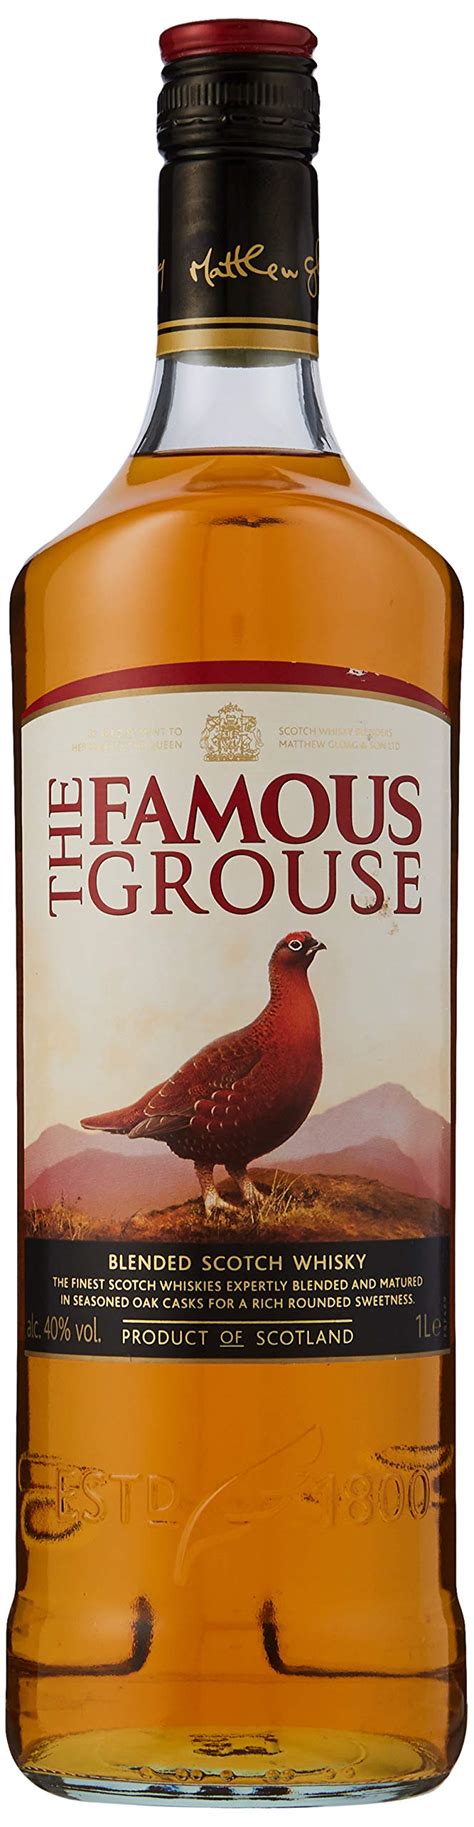 Buy The Famous Grouse Finest Blended Scotch Whisky L Online At